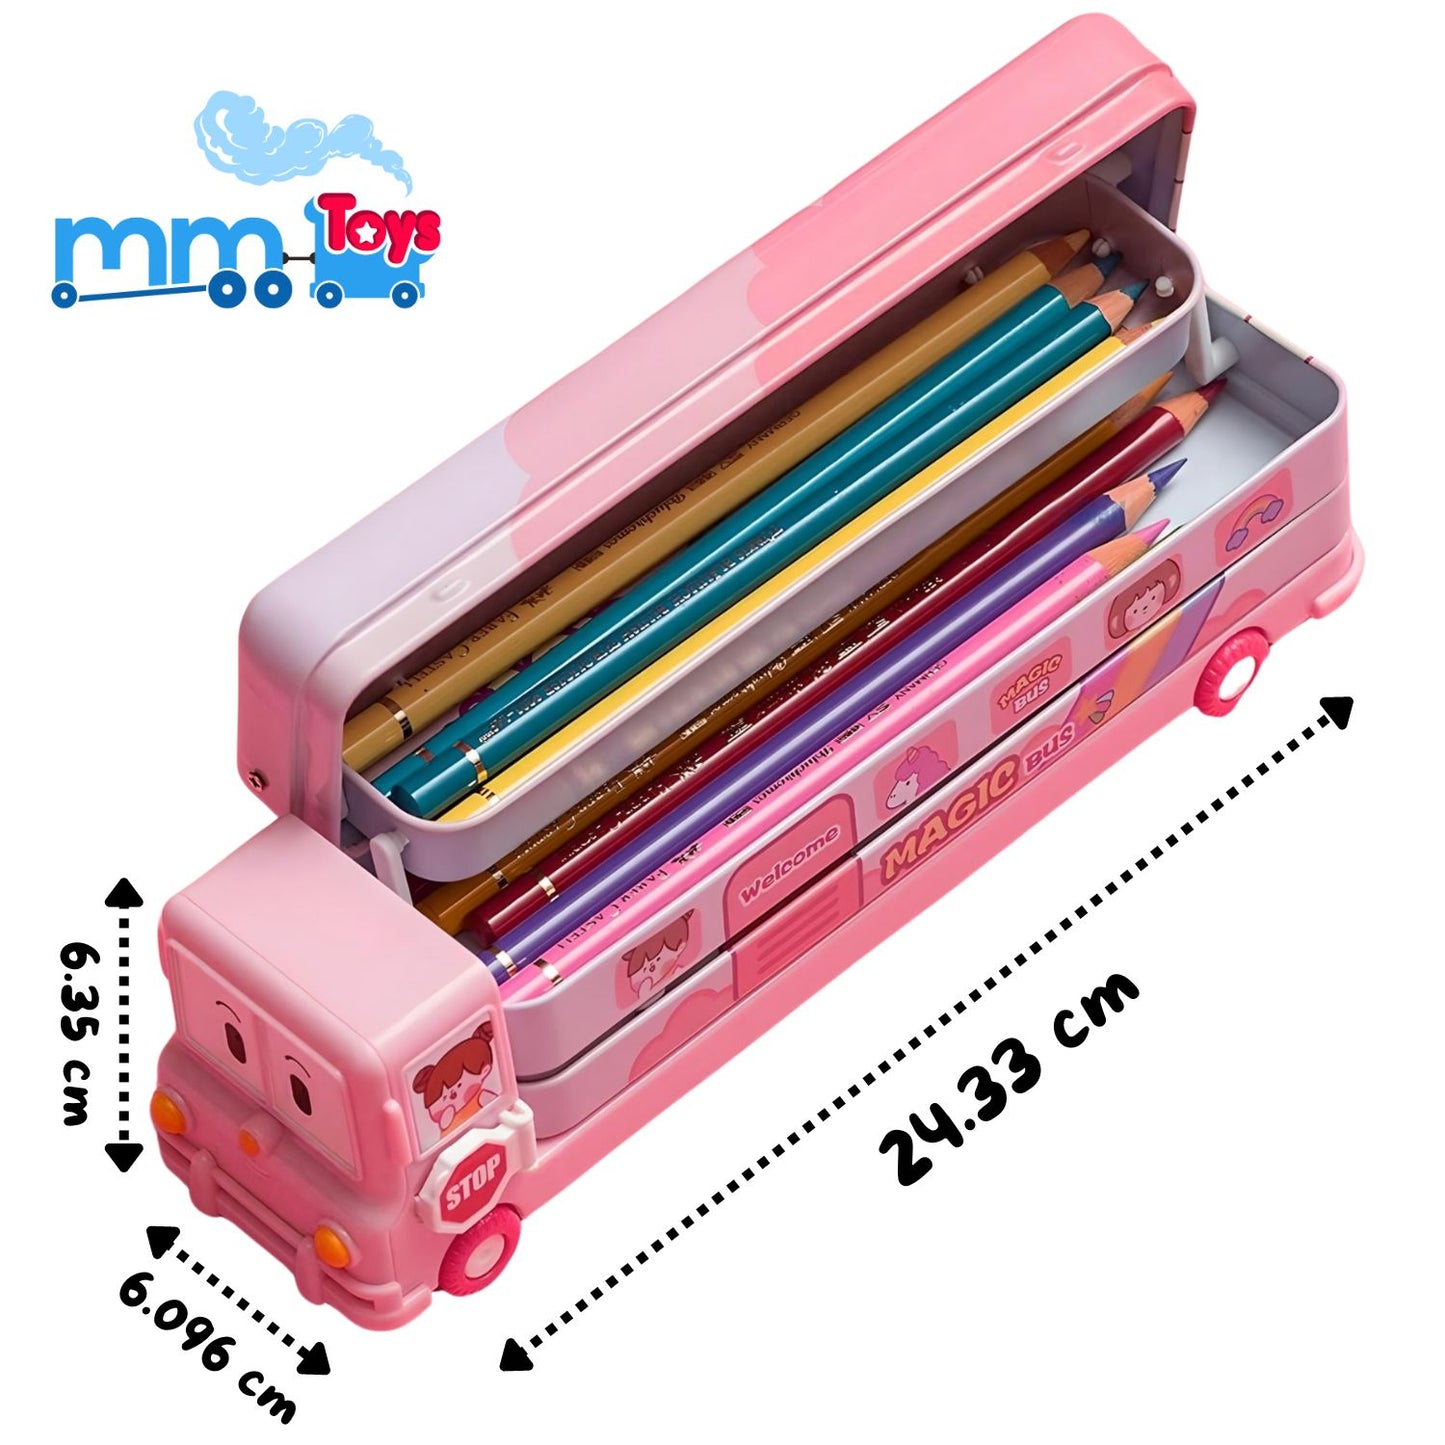 MM TOYS 2-in-1 School Bus Pencil Box & Toy - Movable Wheels, Built-in Sharpener, Durable Metal, Playful Pink